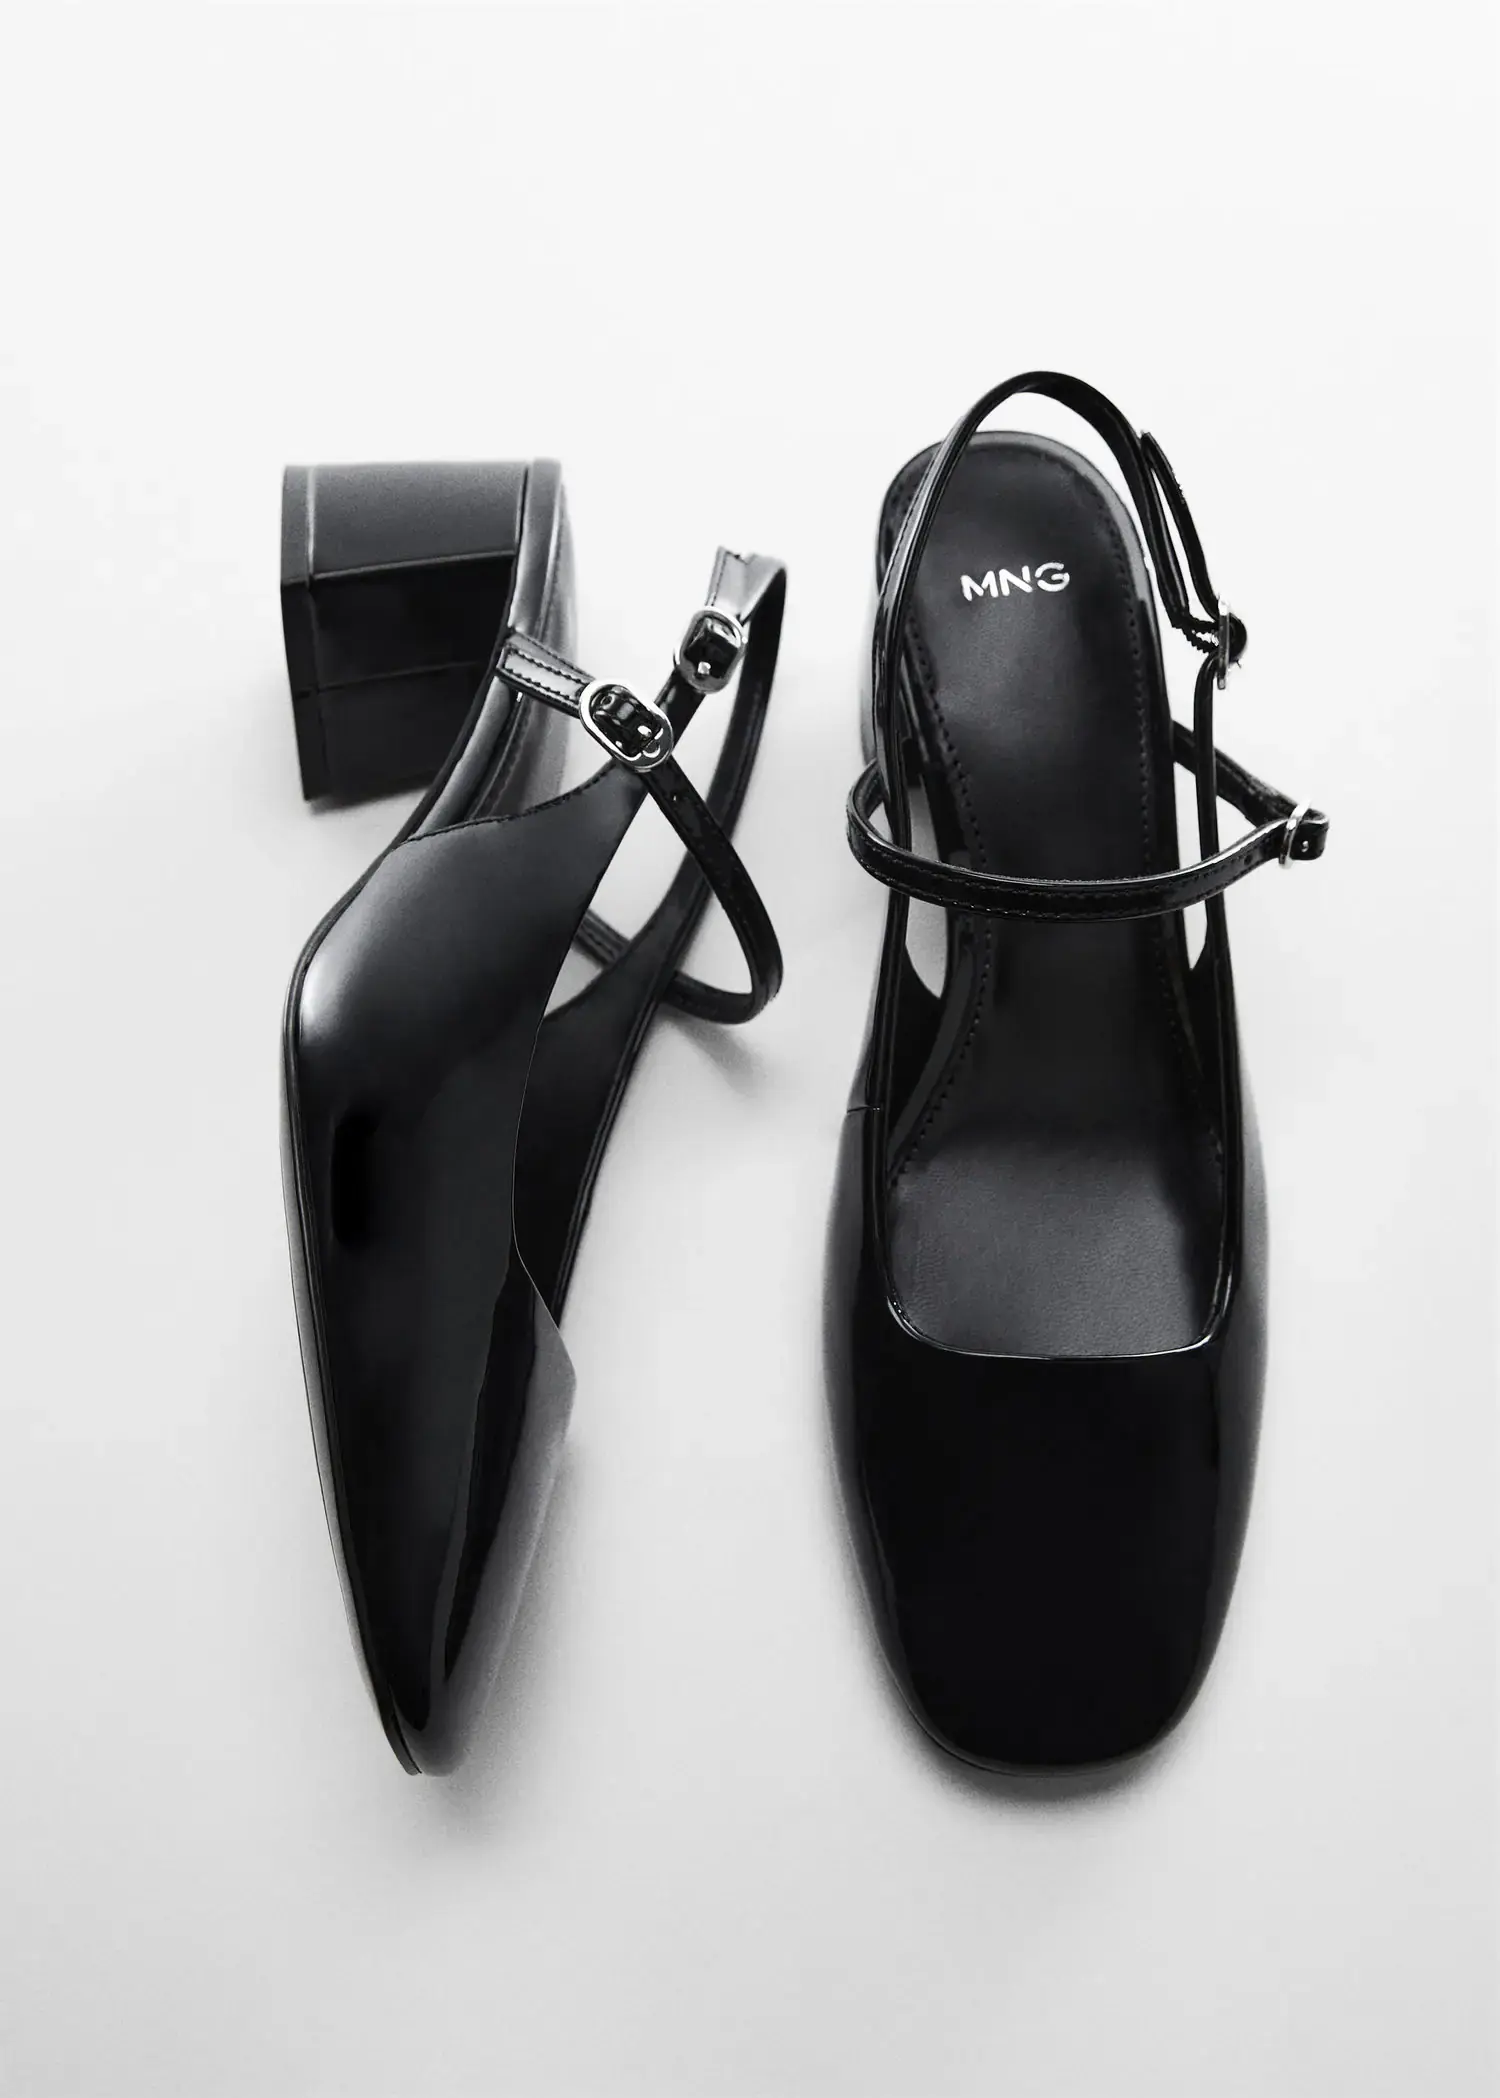 Mango Block heel shoe. a pair of black shoes sitting next to each other on a table. 